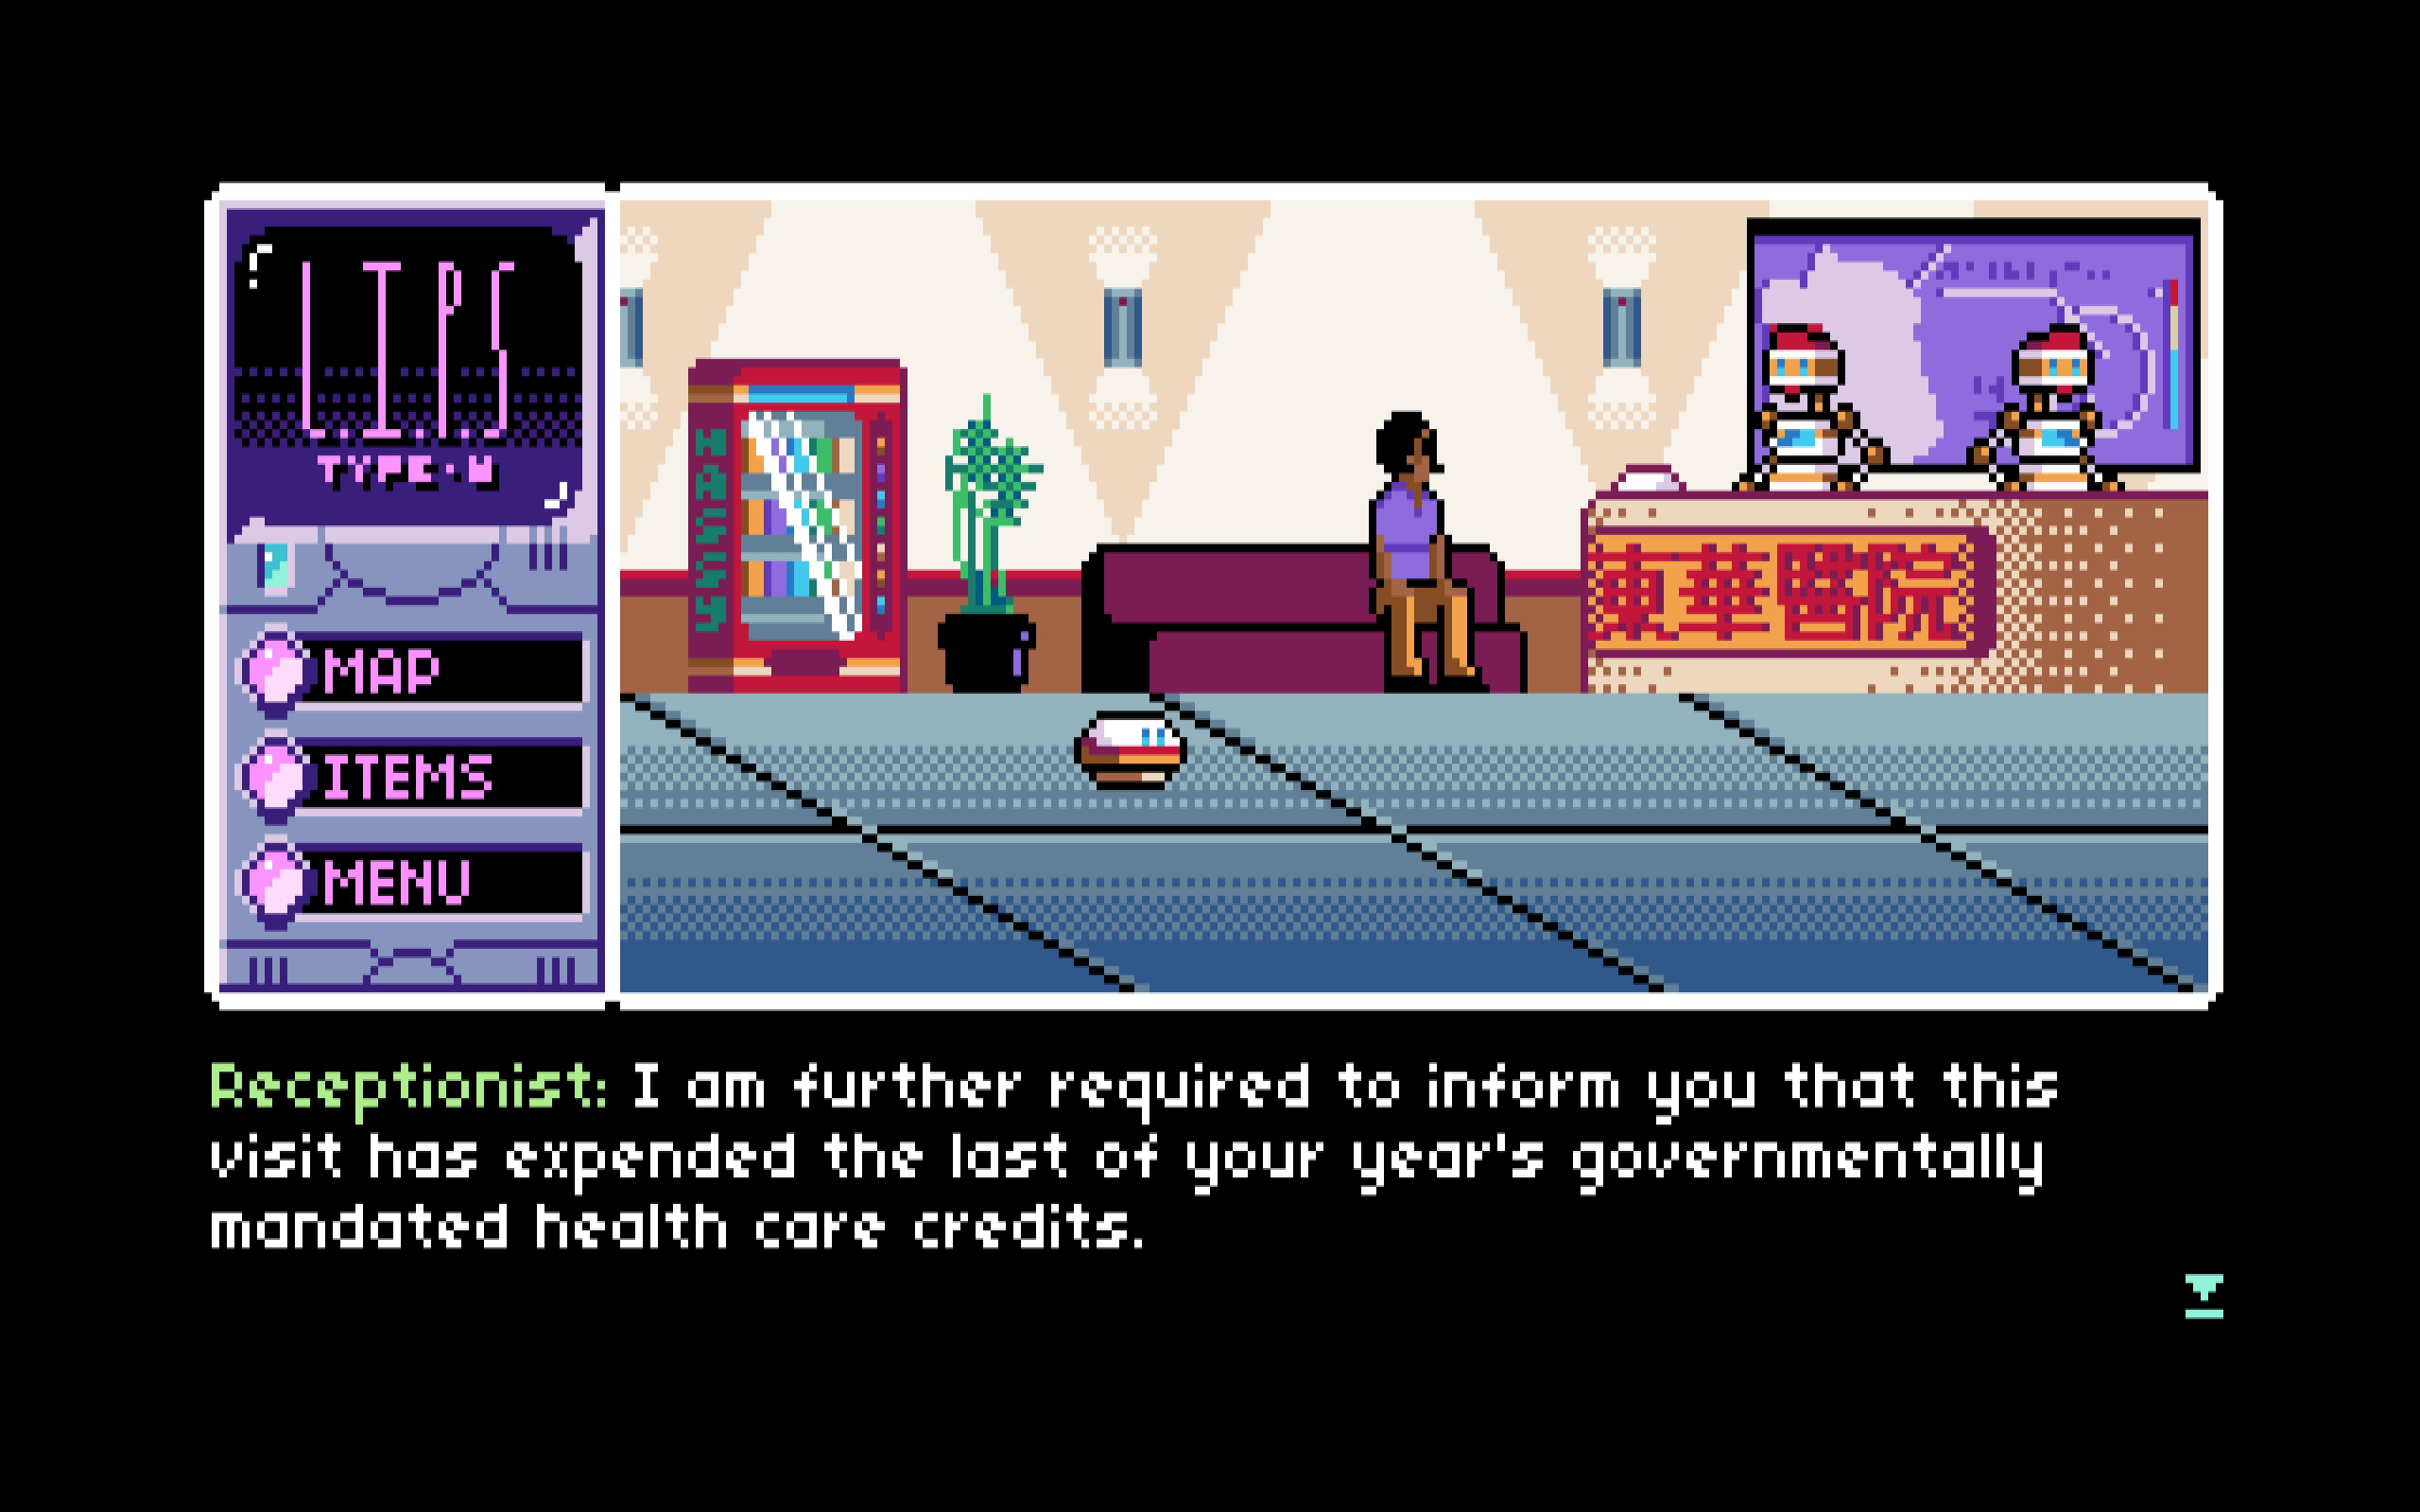 Read Only Memories #6